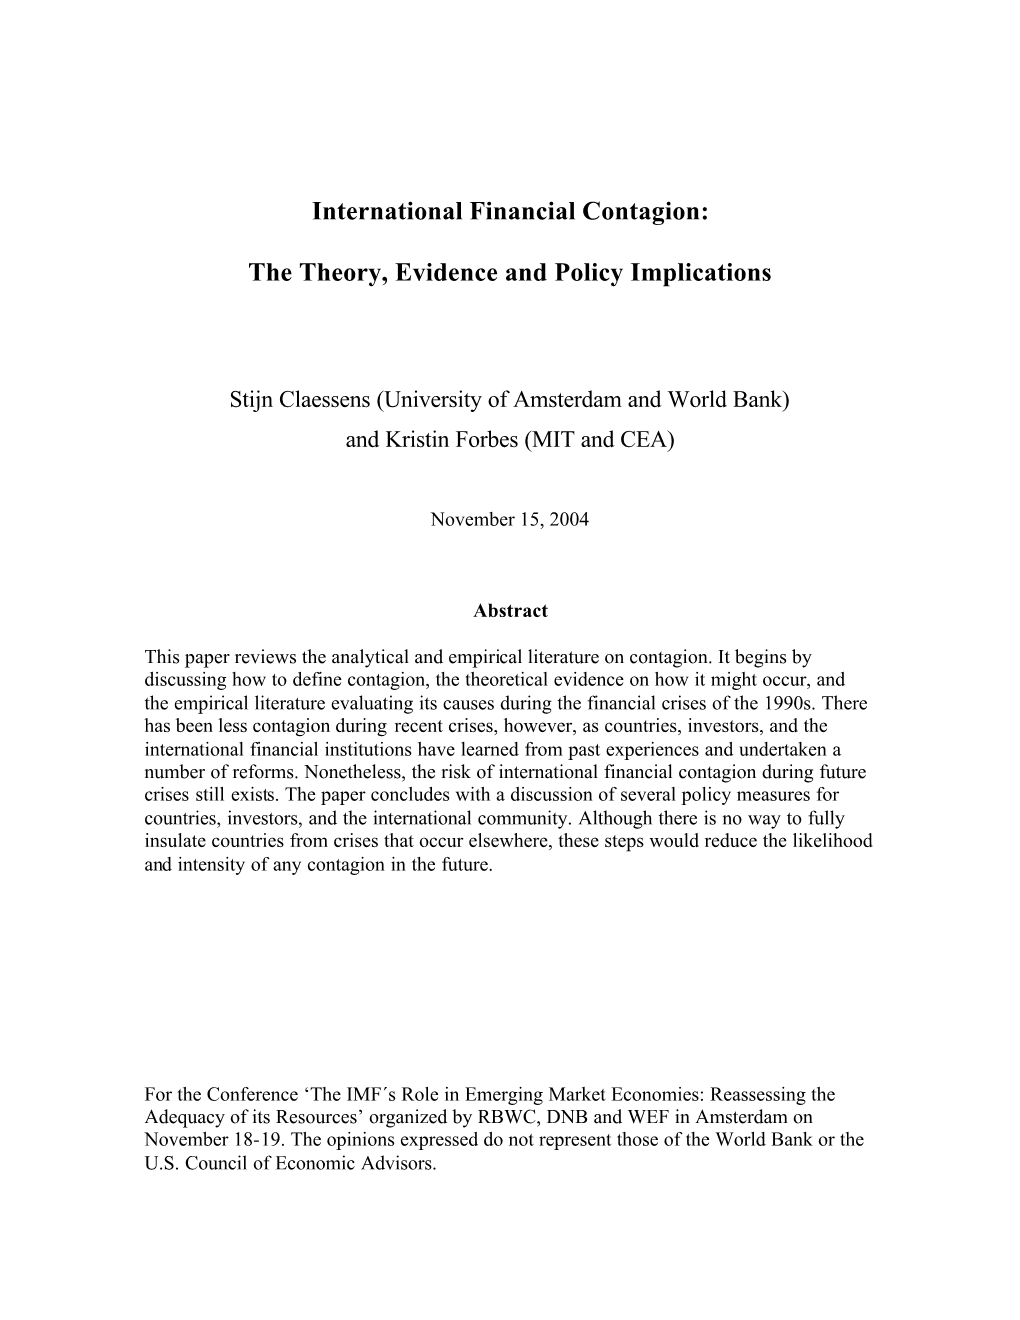 International Financial Contagion: the Theory, Evidence